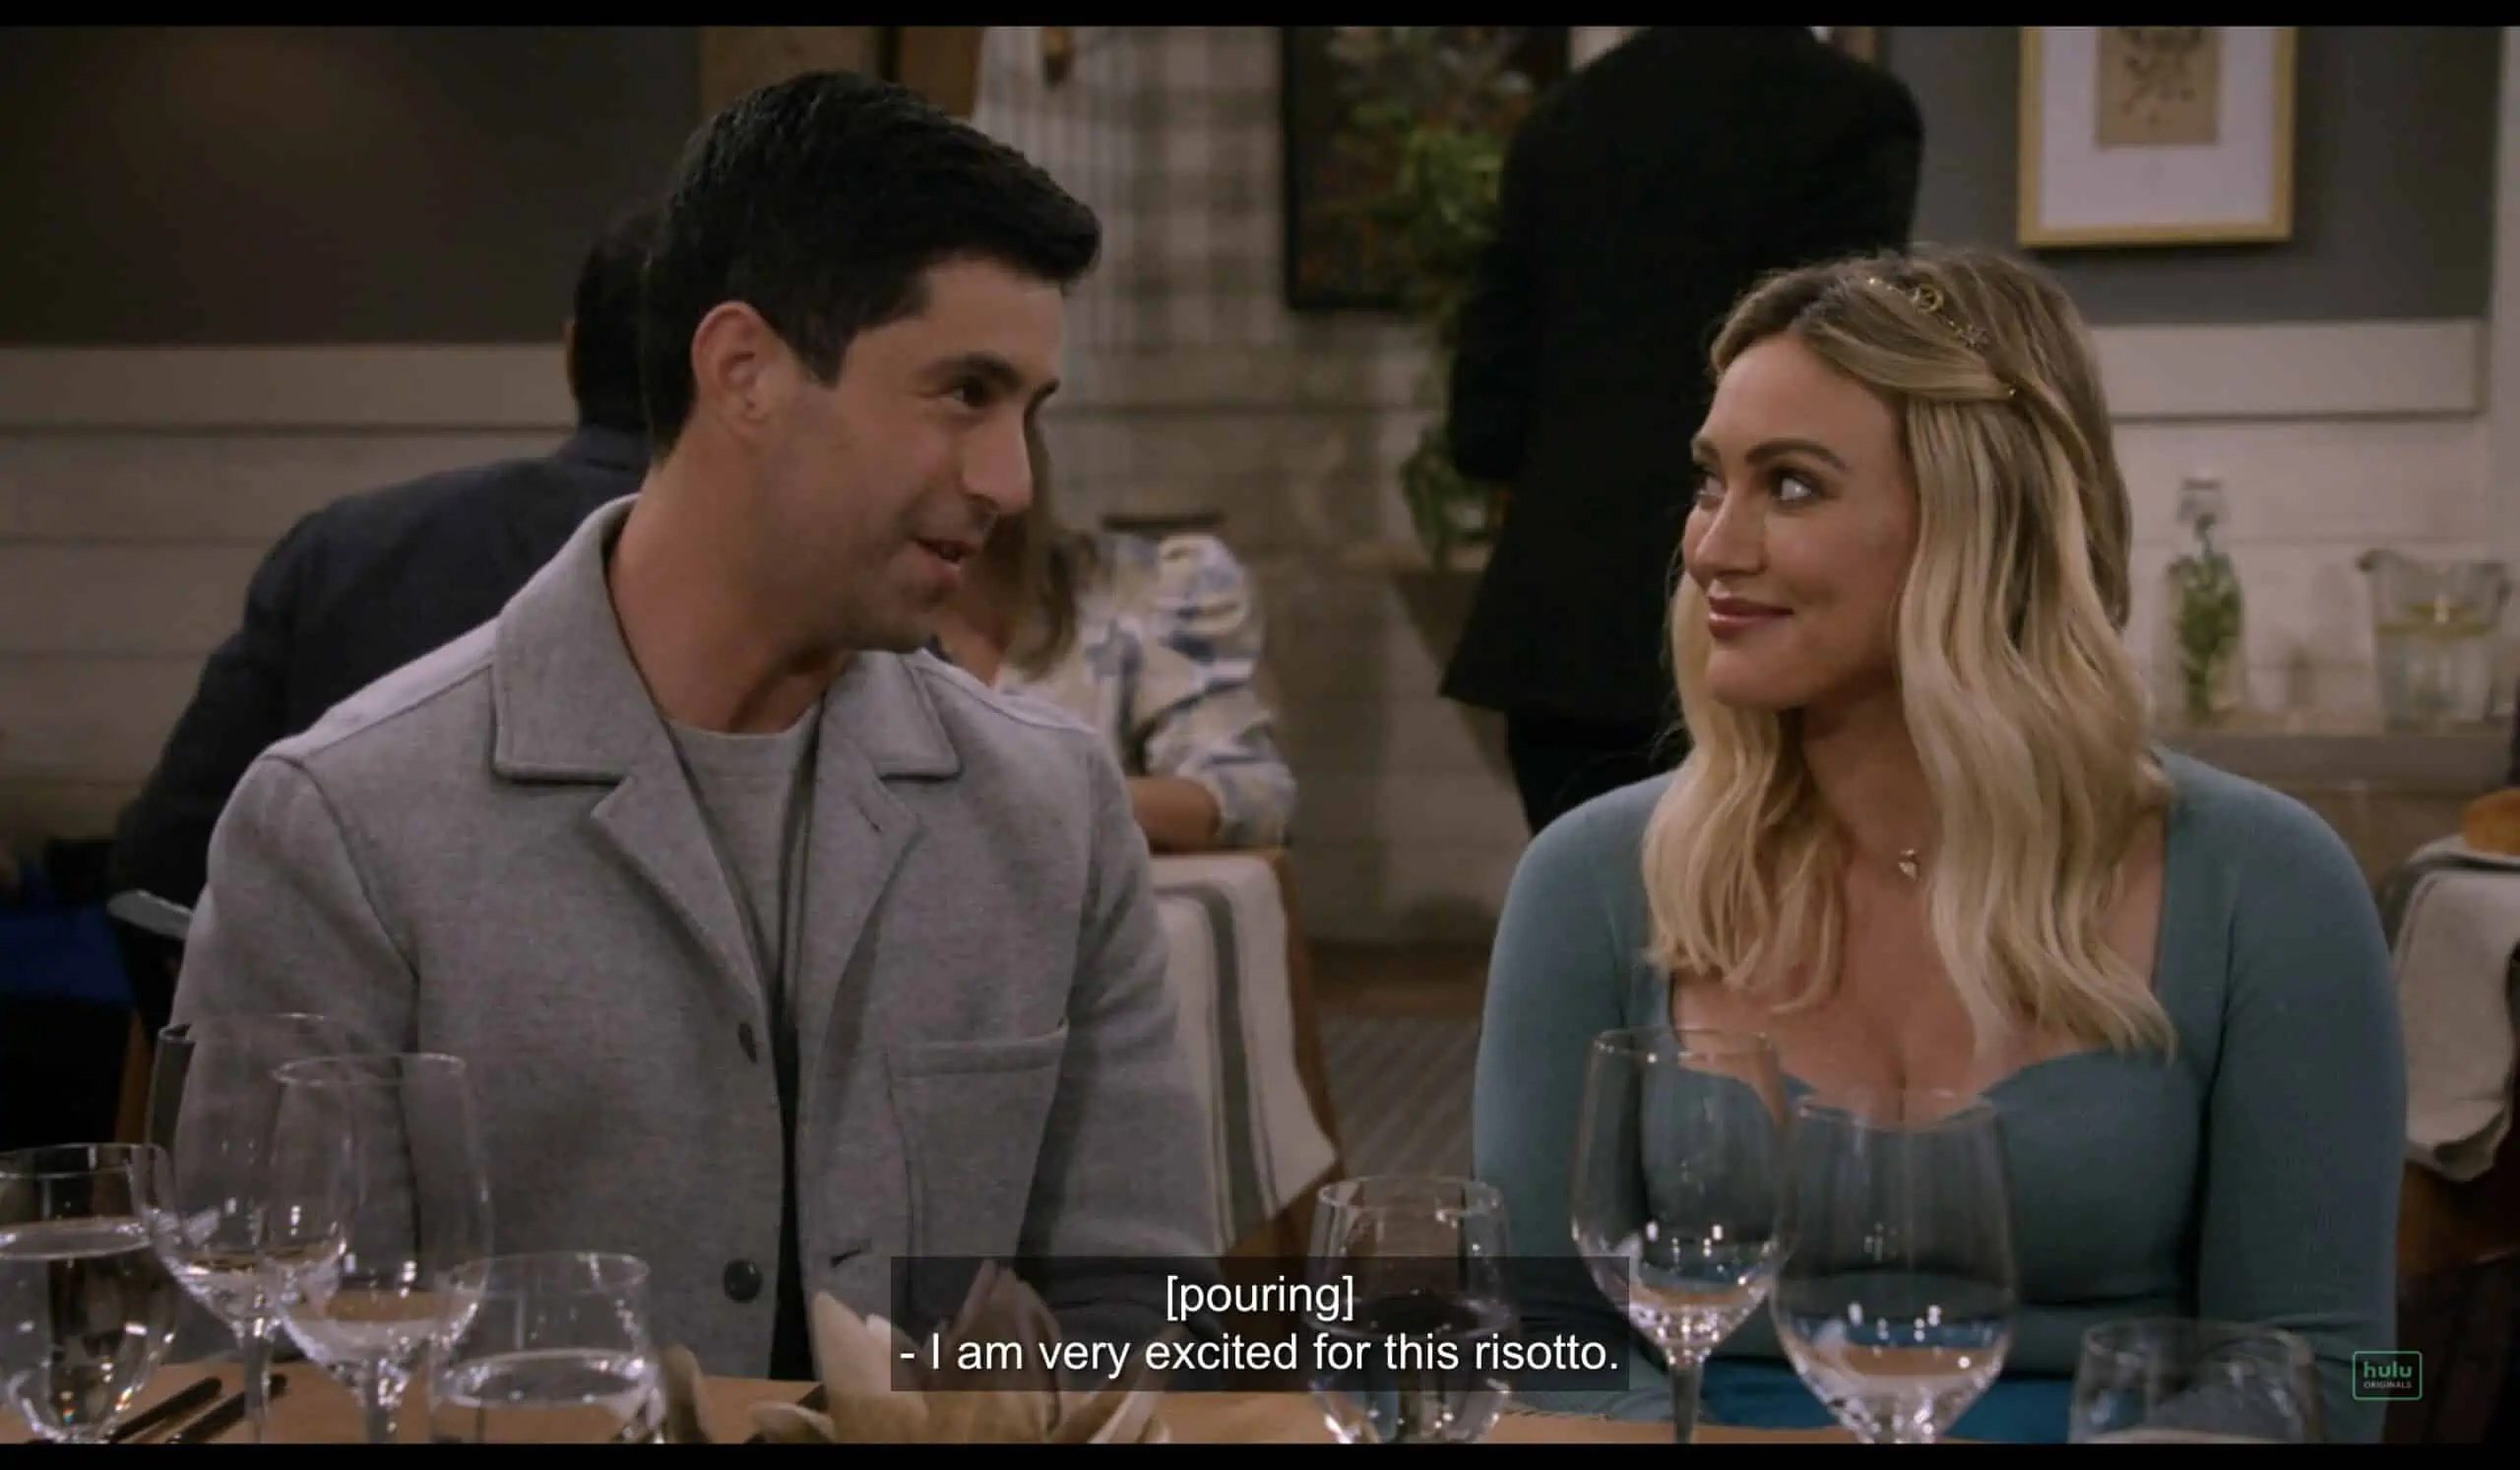 How I Met Your Father: Season 1/Episode 6 “Stacey” – Recap/Review (with Spoilers)